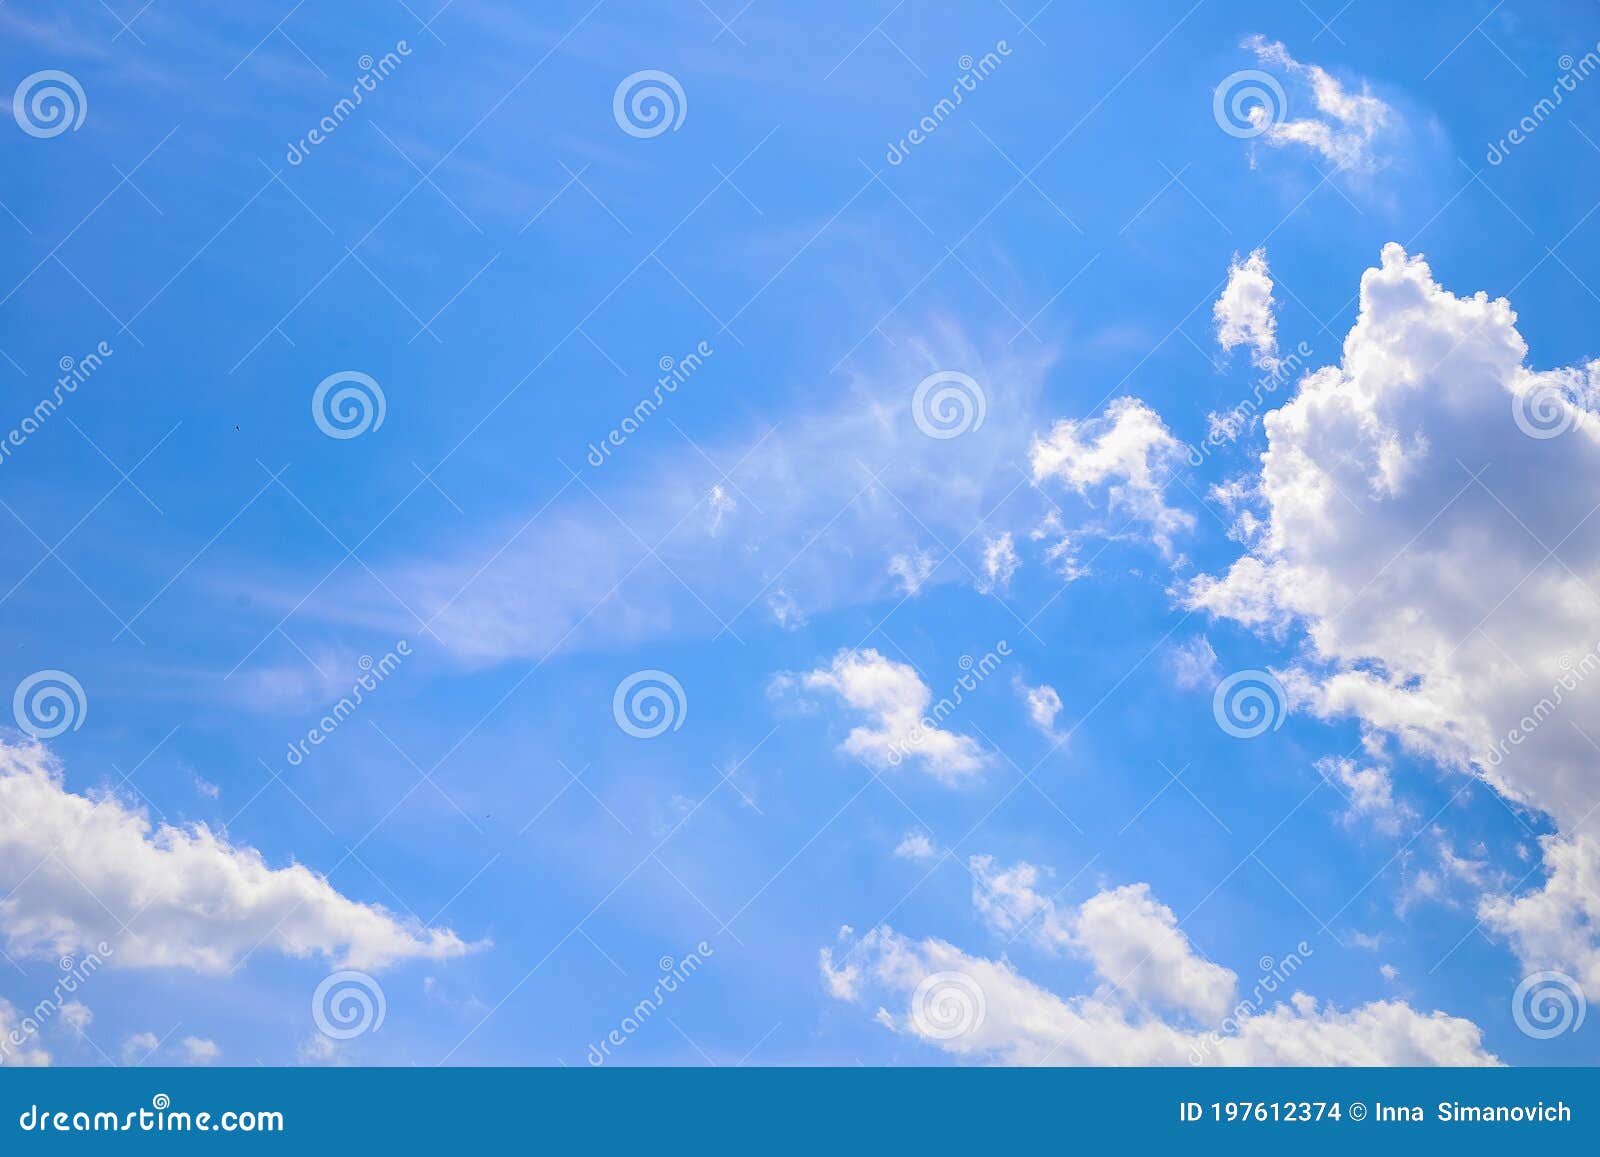 Blue Sky and White Puffy Clouds Stock Photo - Image of puffy, moving ...